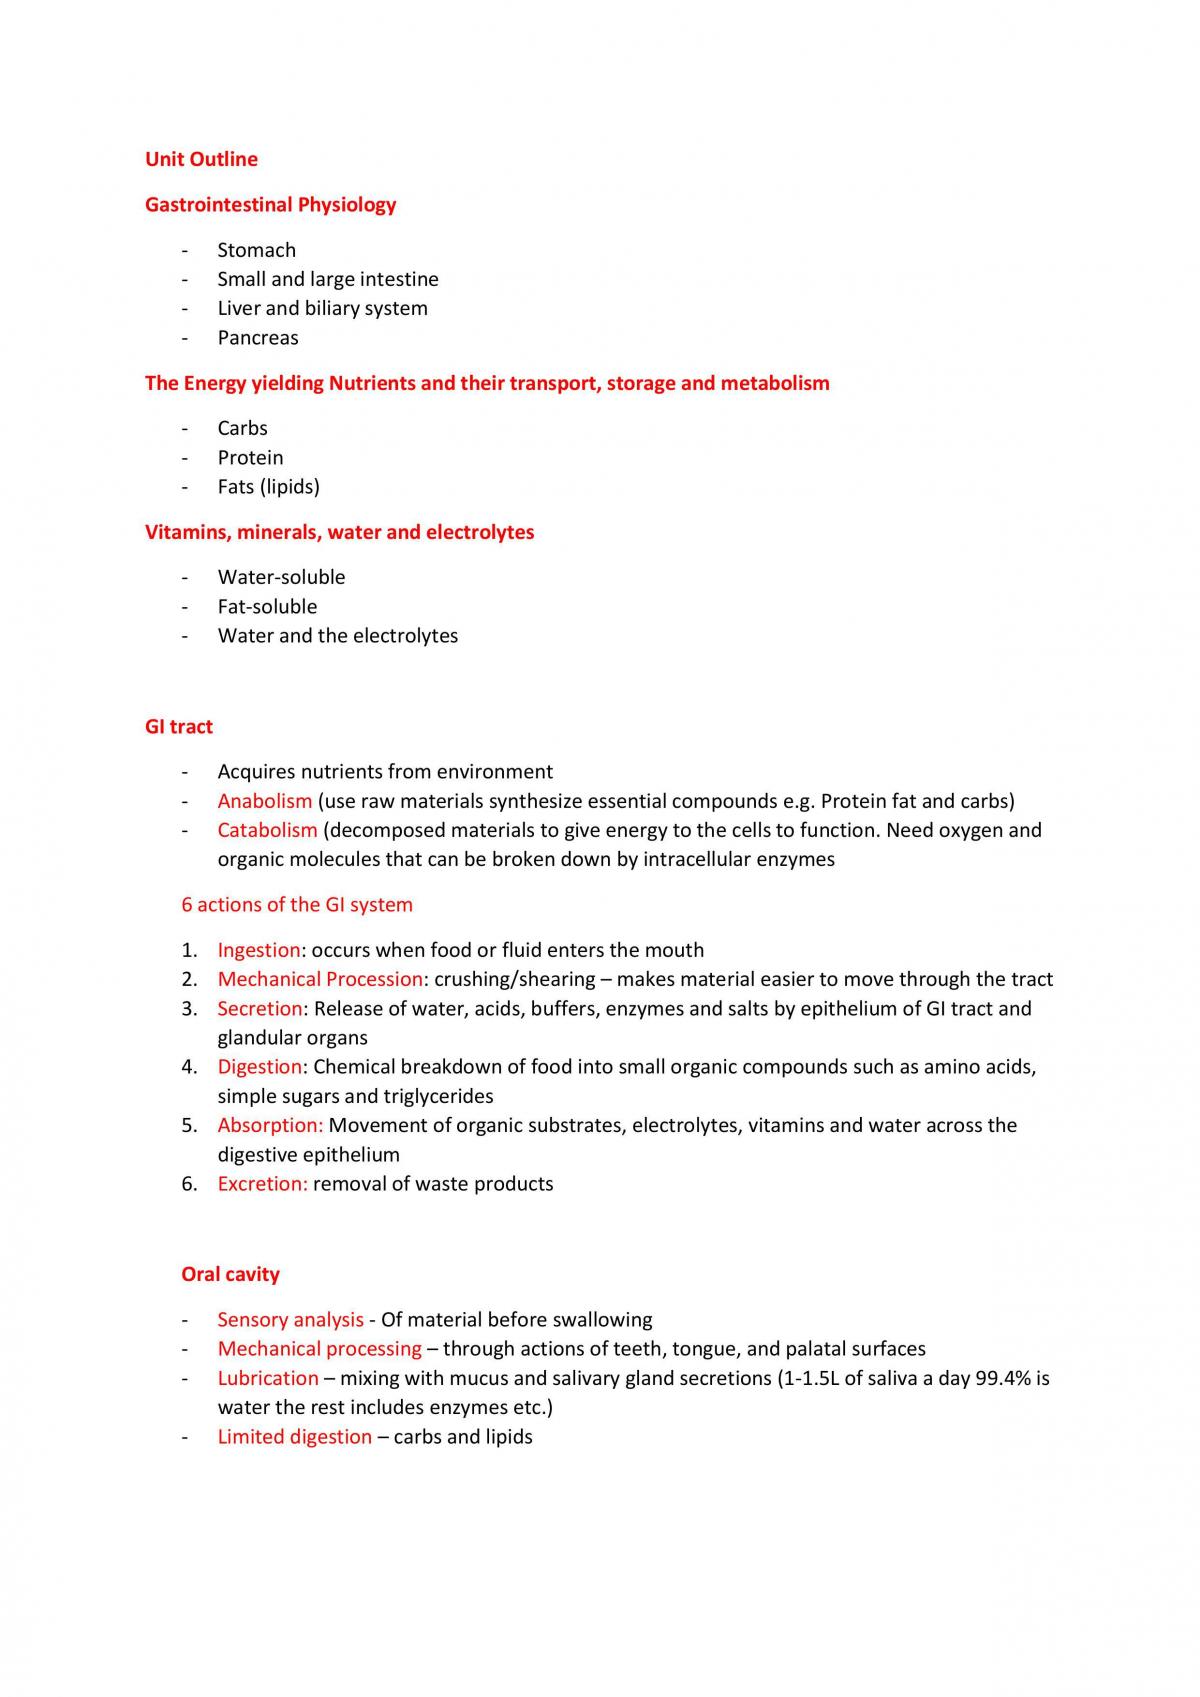 HSN211 Study Notes  - Page 1